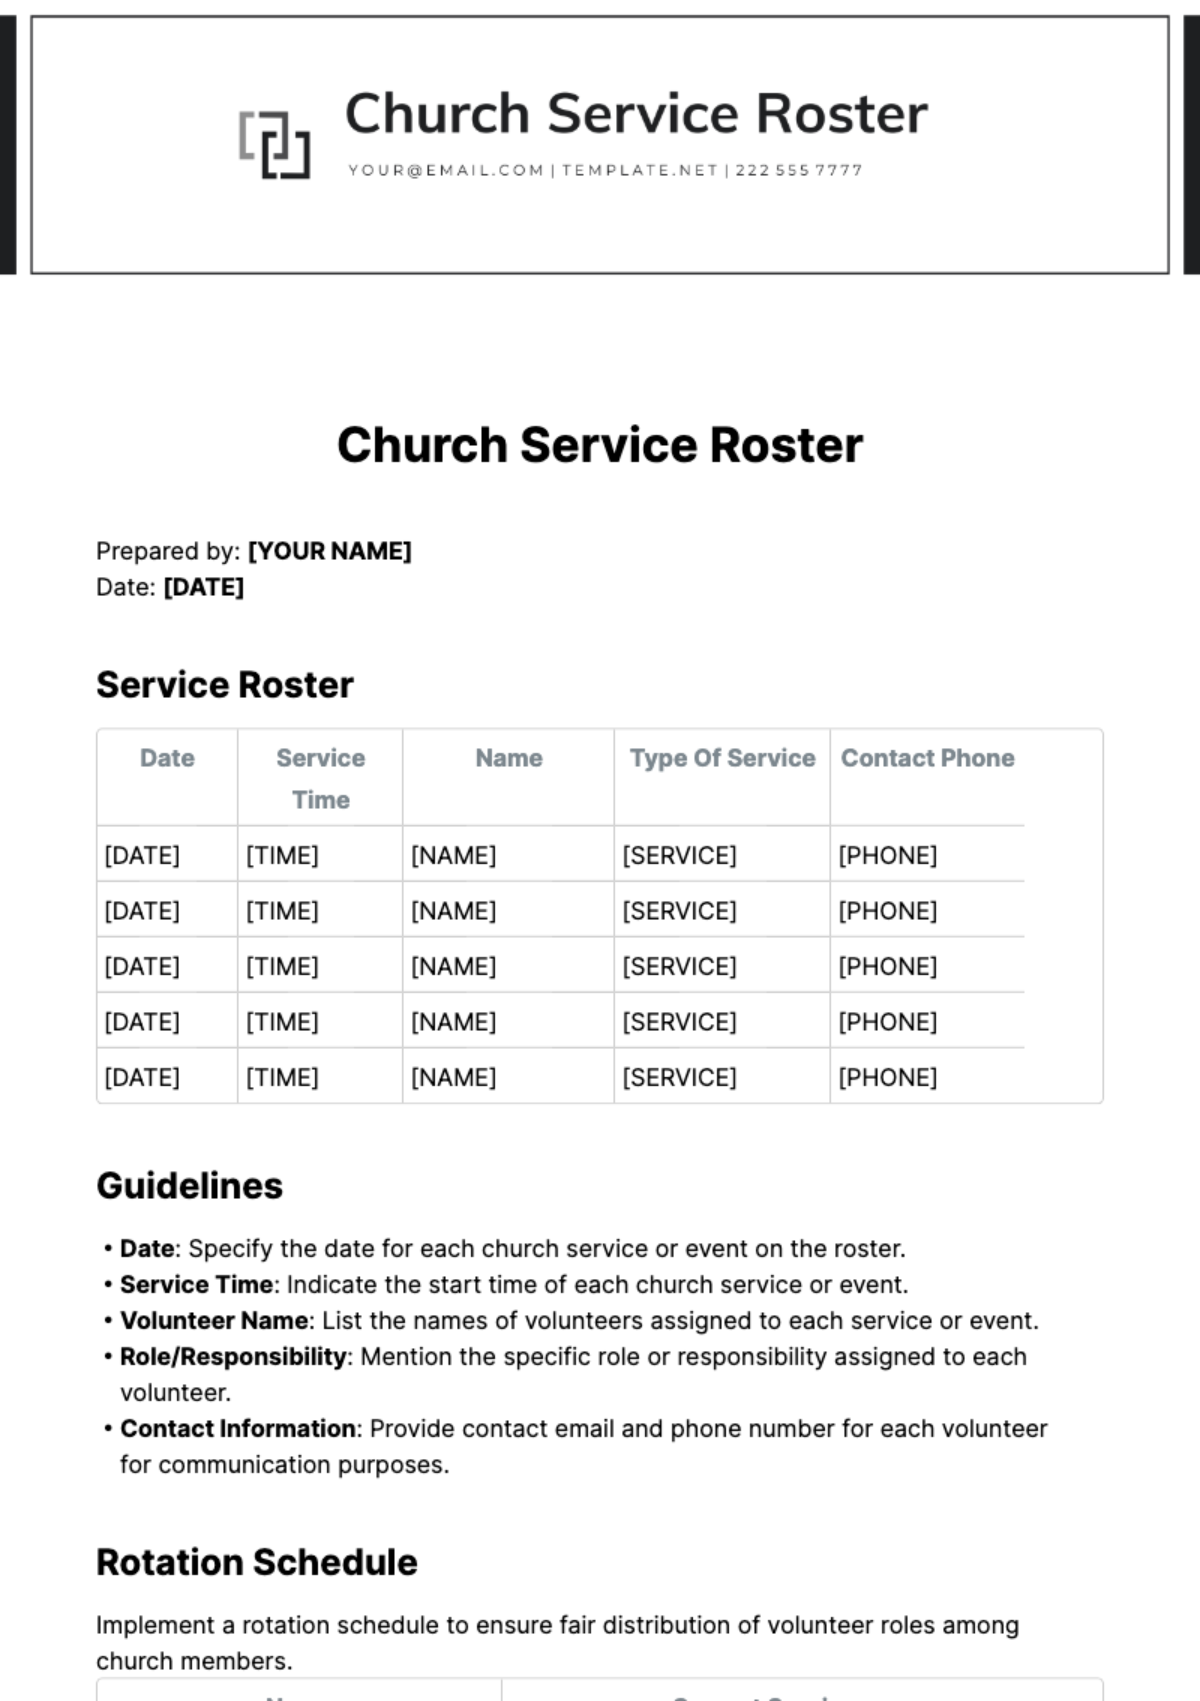 Church Service Roster Template